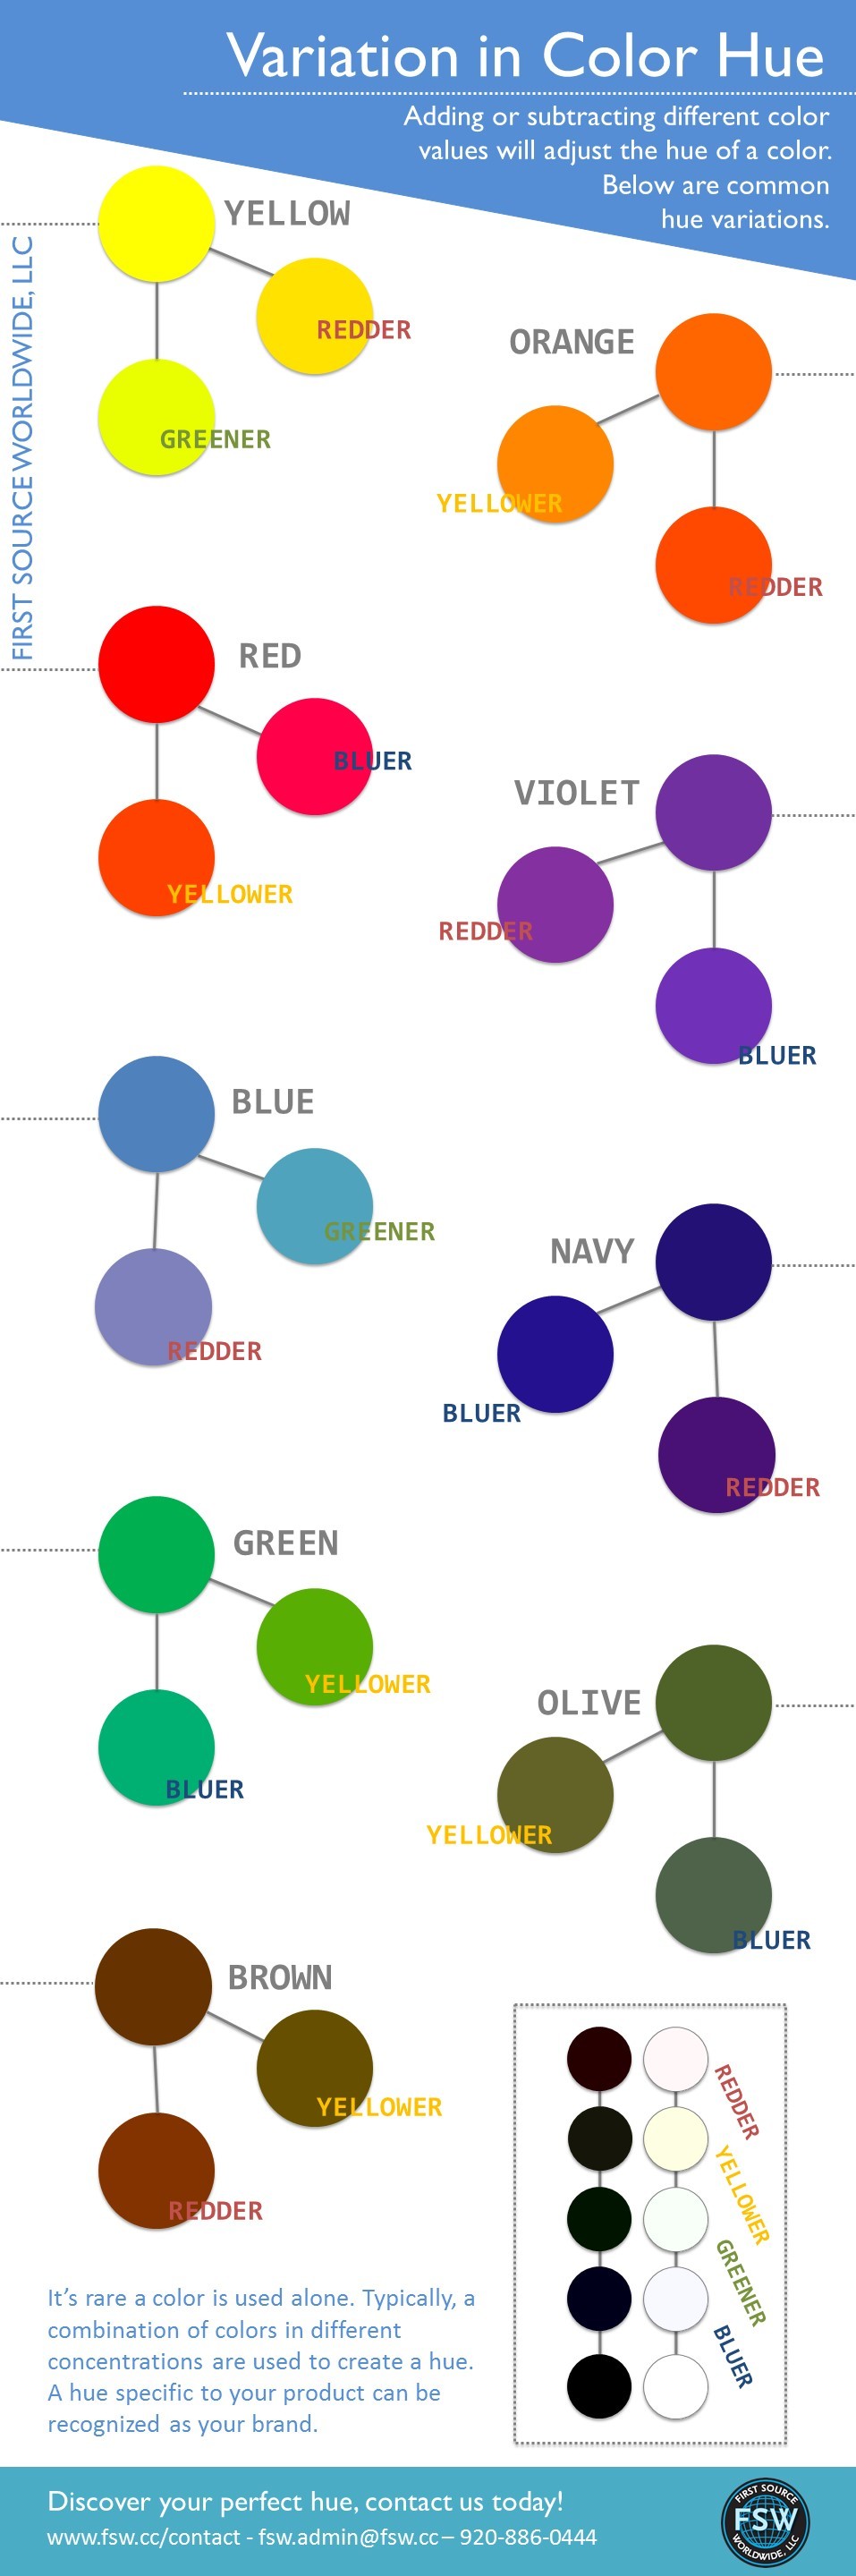 color and hue infographic by fsw